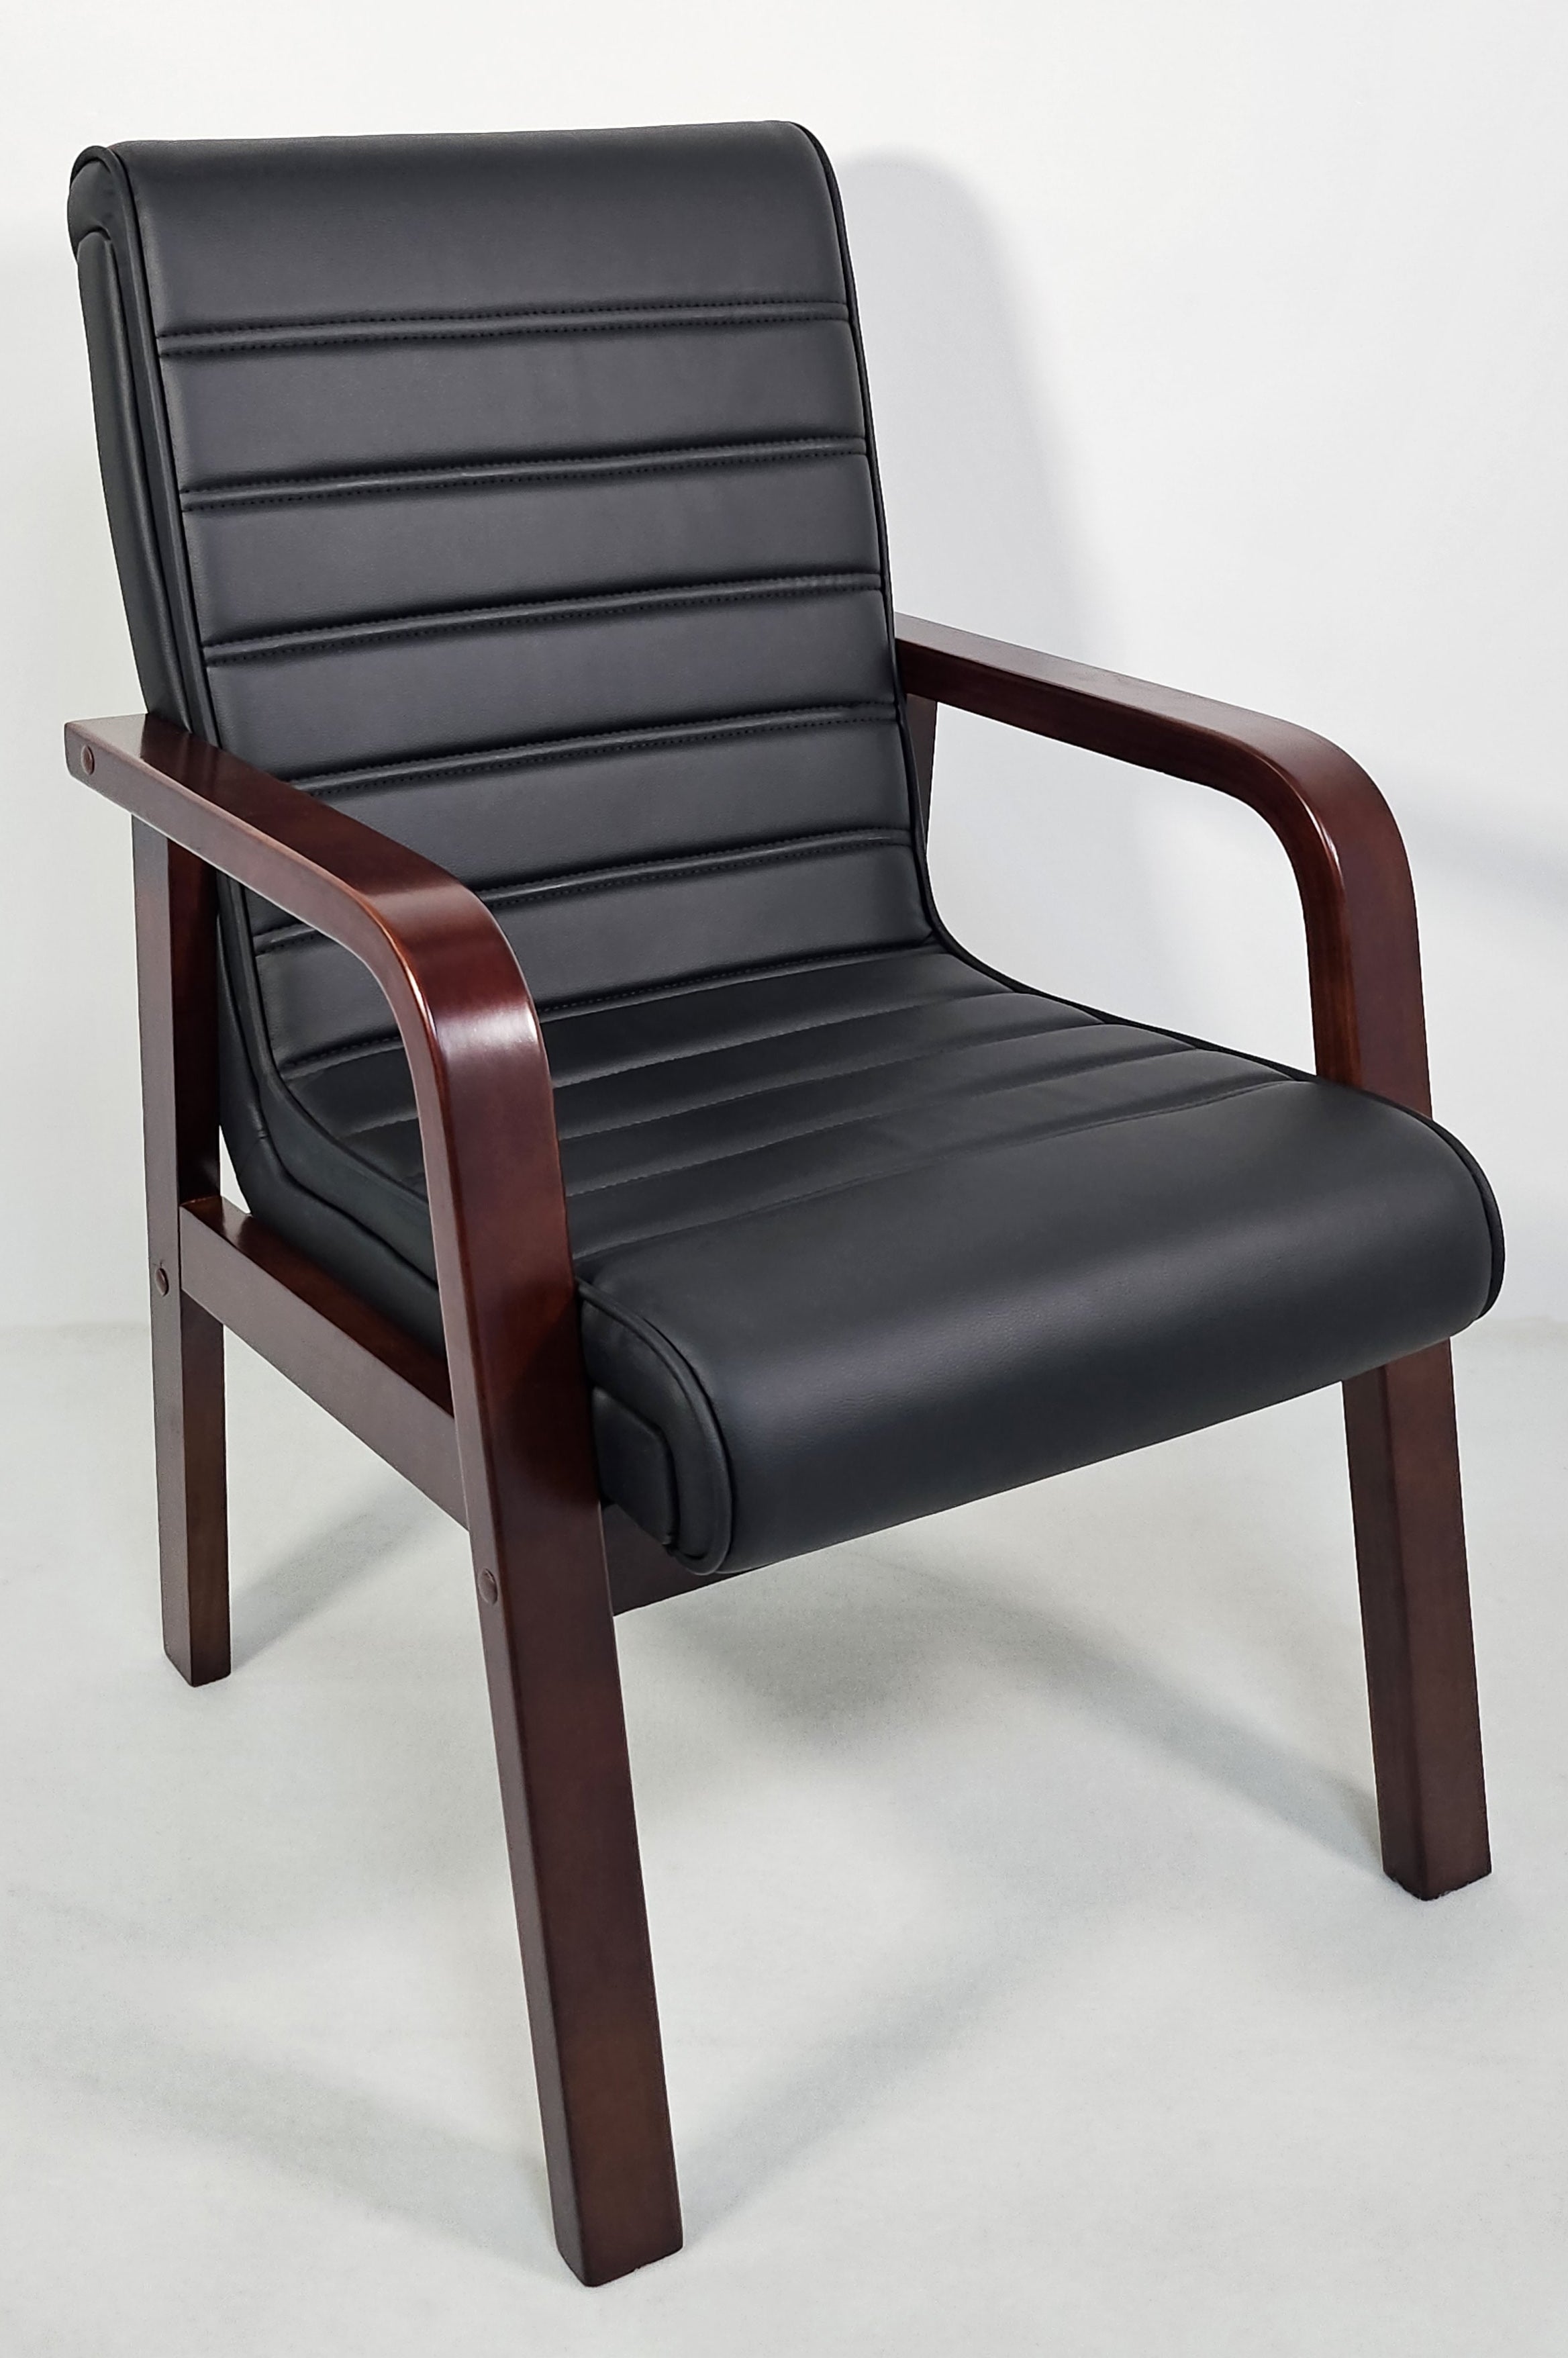 Black Leather Visitor Chair with Curved Walnut Arms - C050-1